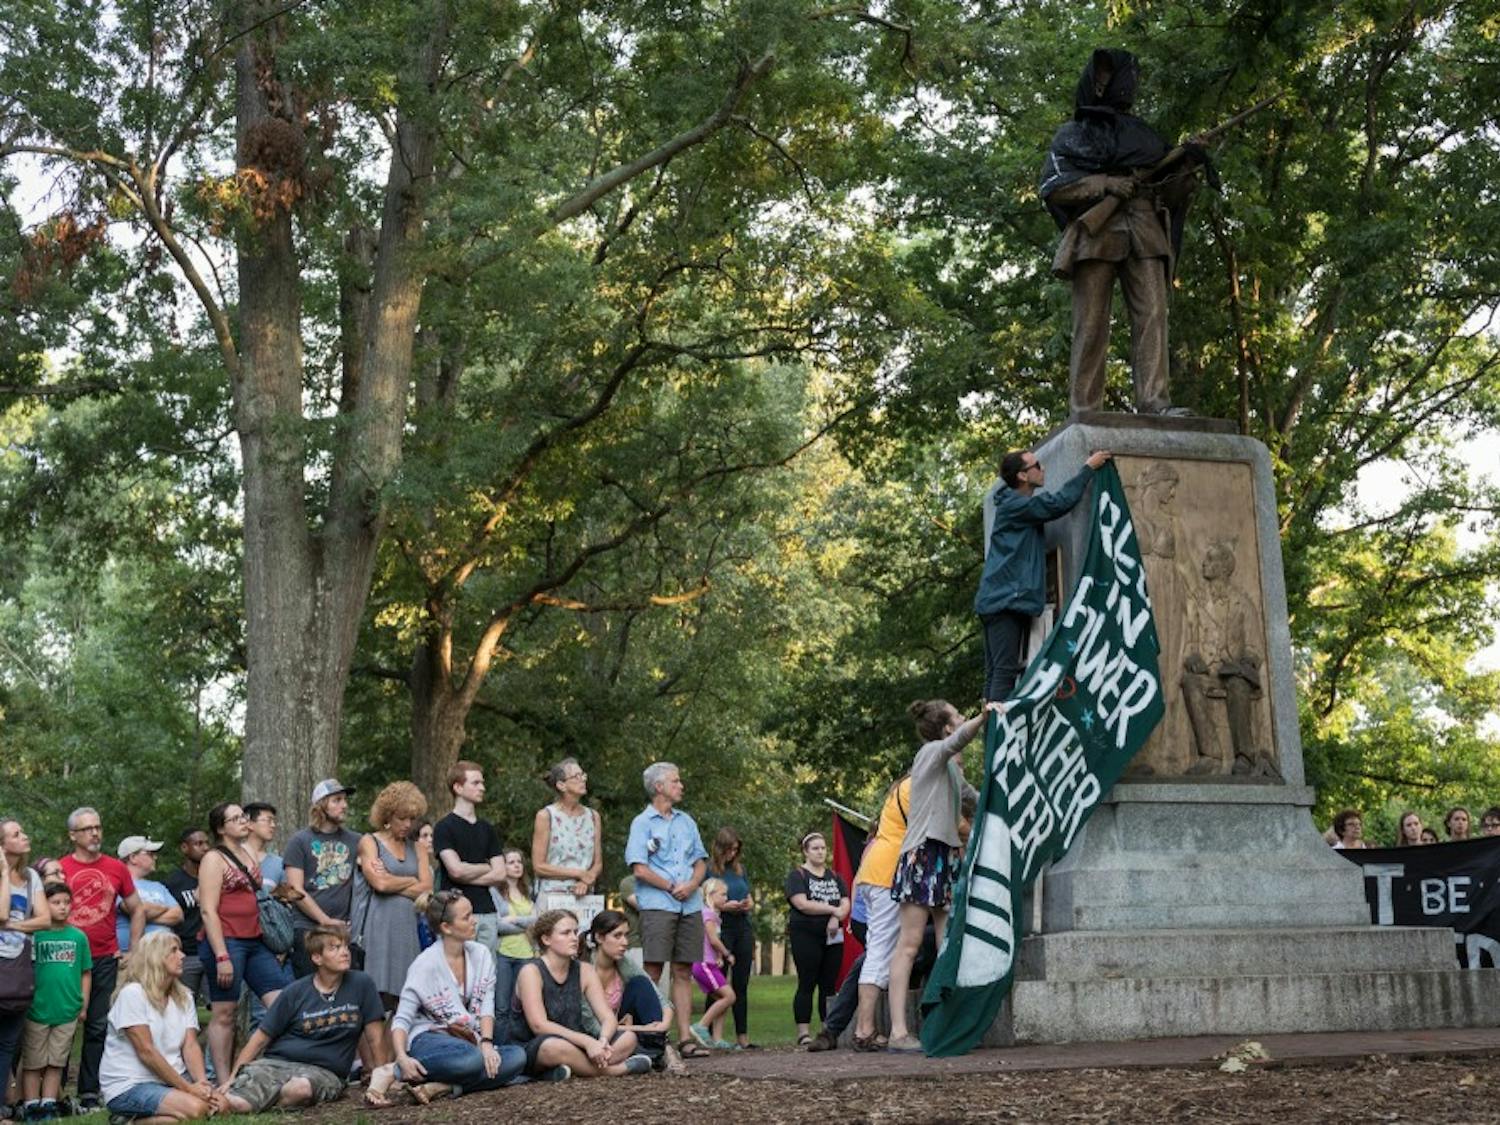 Protesters drape a flag that reads "Rest in Power: Heather Heyer" over the Silent Sam monument. Heyer was hit and killed by a car that drove into a crowd during the Charlottesville protests.